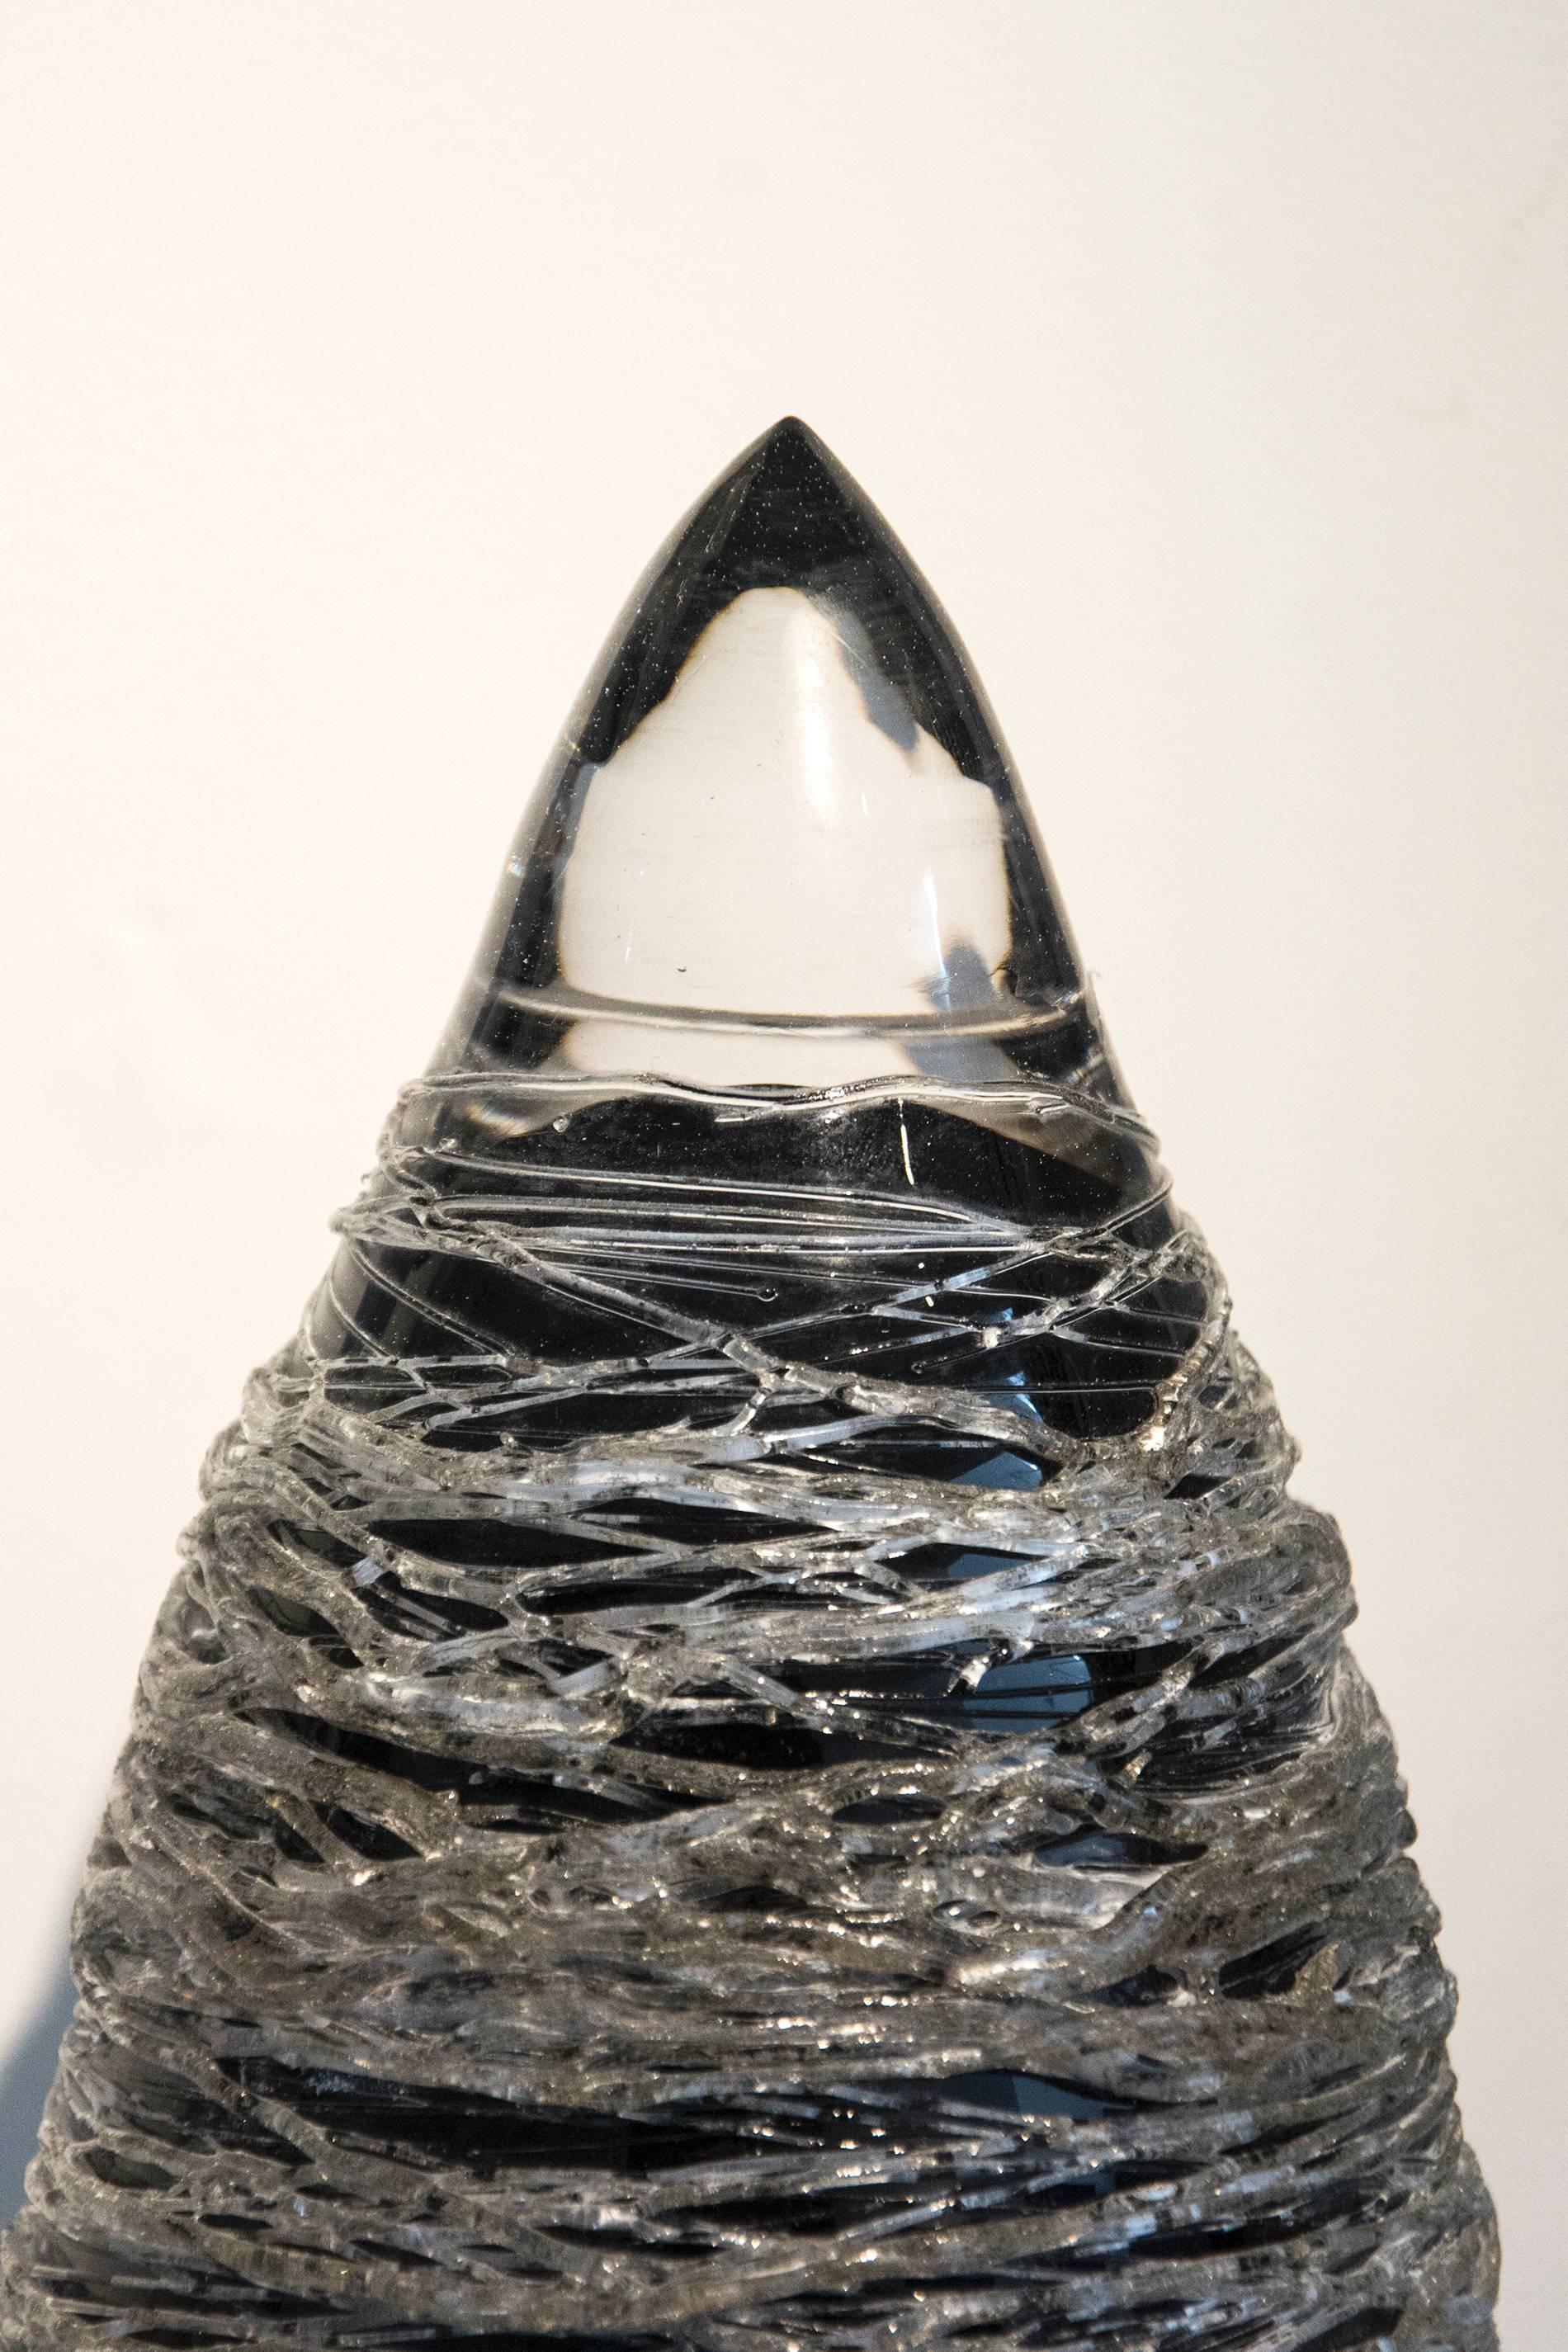 Cocoon Series - Black Abstract Sculpture by Julia Reimer